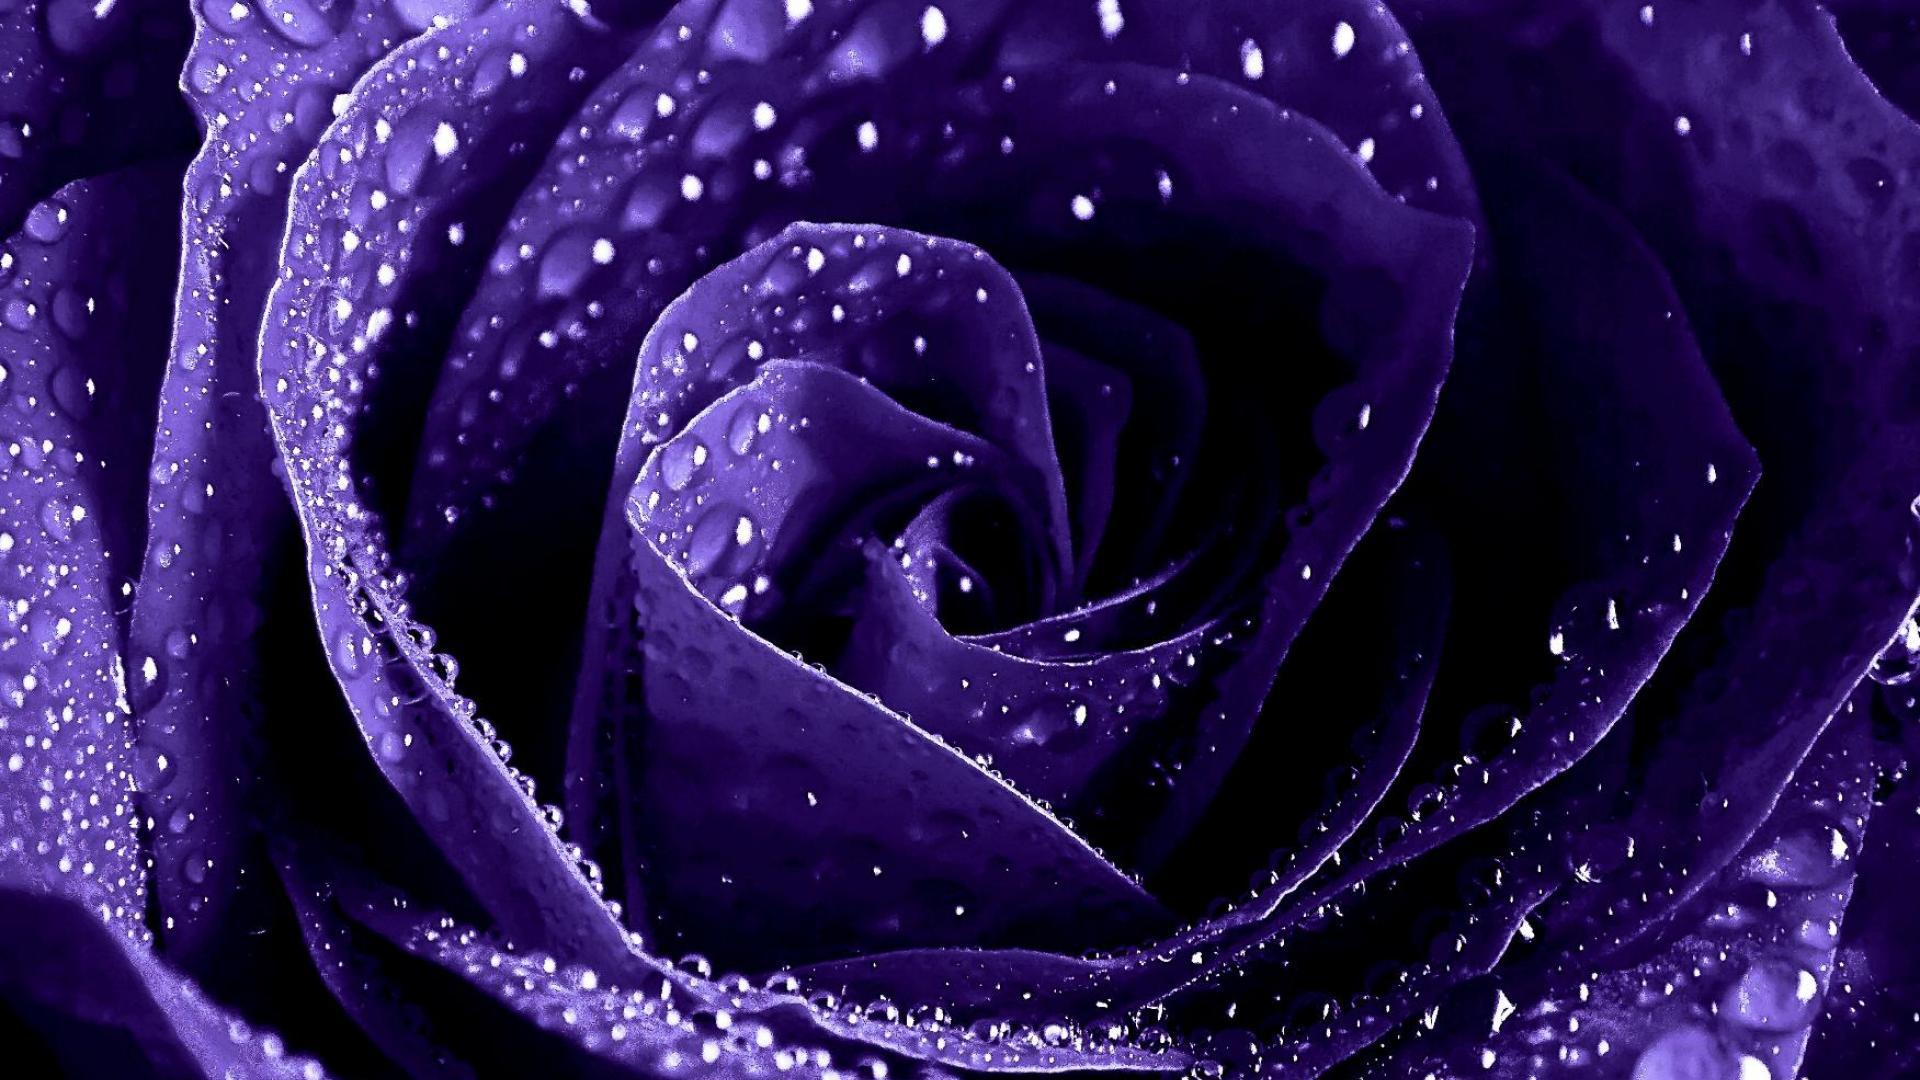 Purple Roses Wallpapers   Wallpaper High Definition High Quality